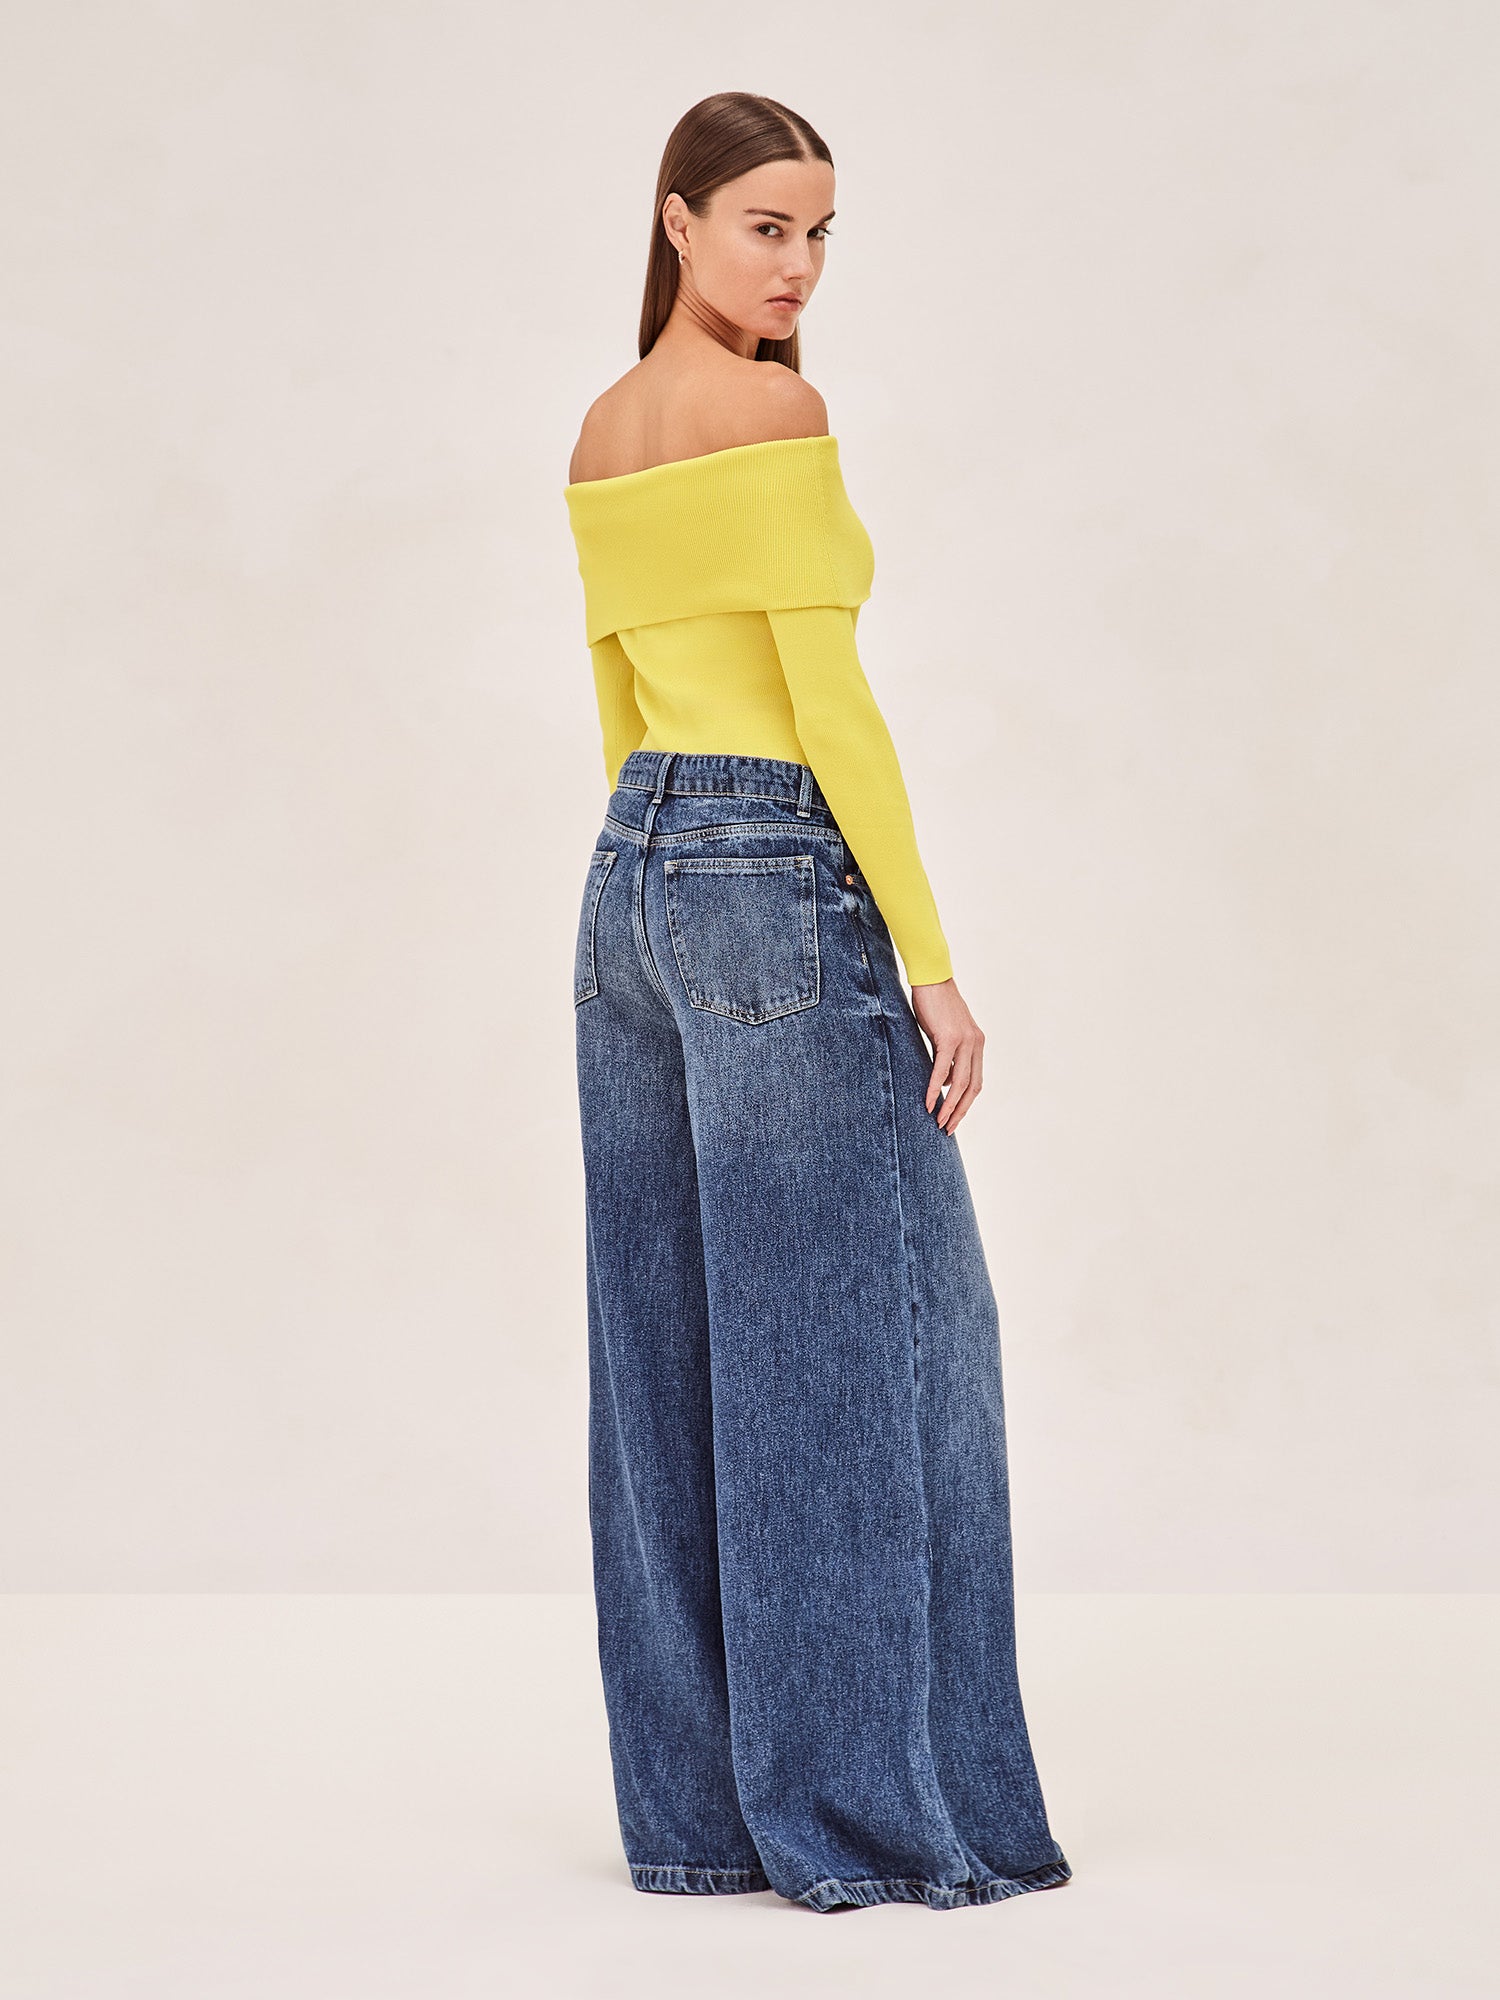 ALEXIS Amie off the shoulder long sleeve top in yellow